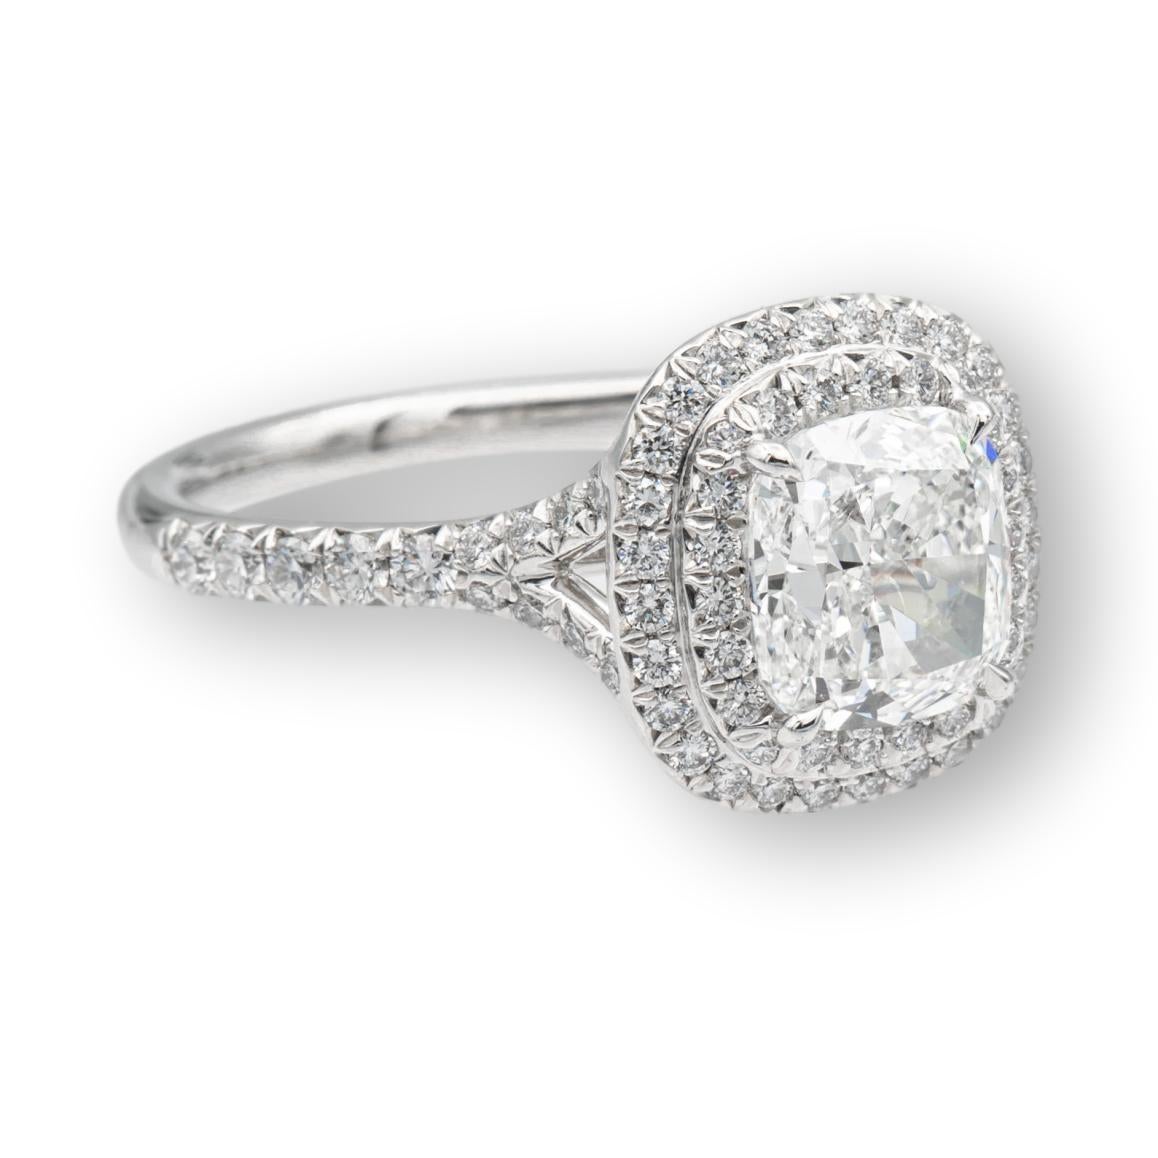 Tiffany & Co. Soleste engagement ring with a 1.56 ct cushion center , I Color, VS1 clarity finely crafted in platinum, accented by a double row halo design with round brilliant cut bead set diamonds weighing 0.36 carats approximately in the D-G